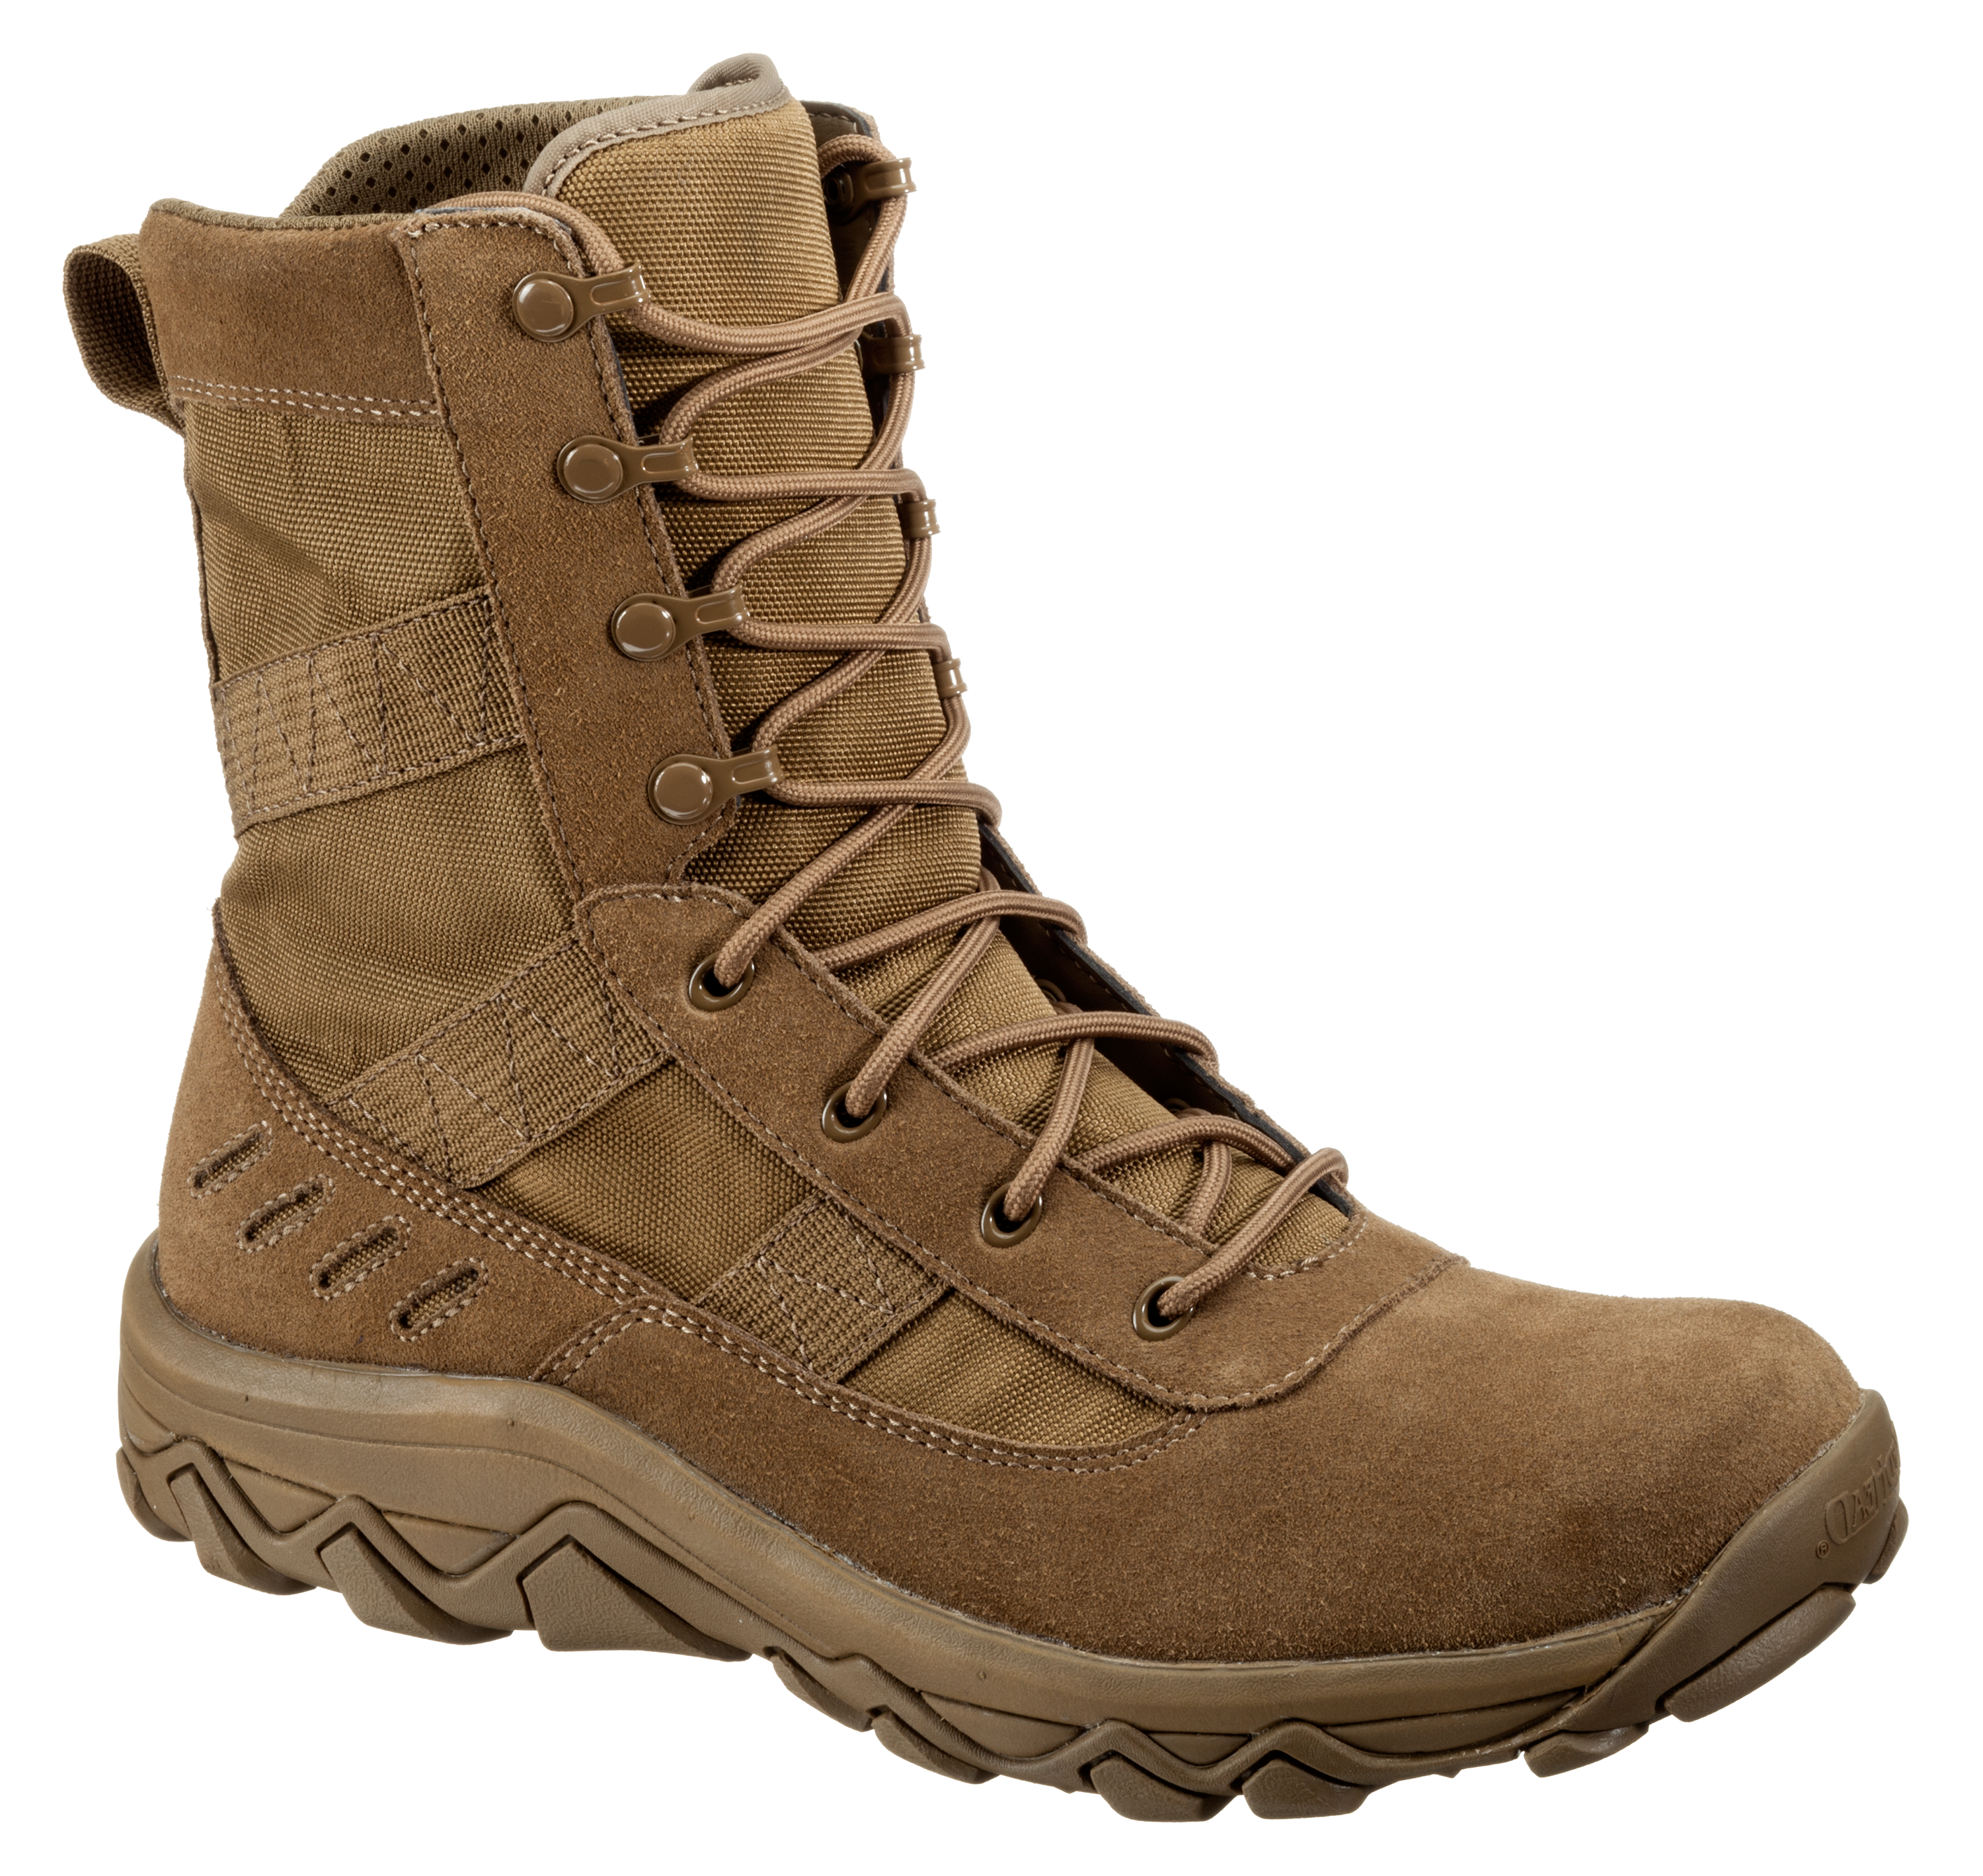 RedHead RCT Warrior Ultra Mil-Spec Tactical Boots for Men - Coyote - 13M